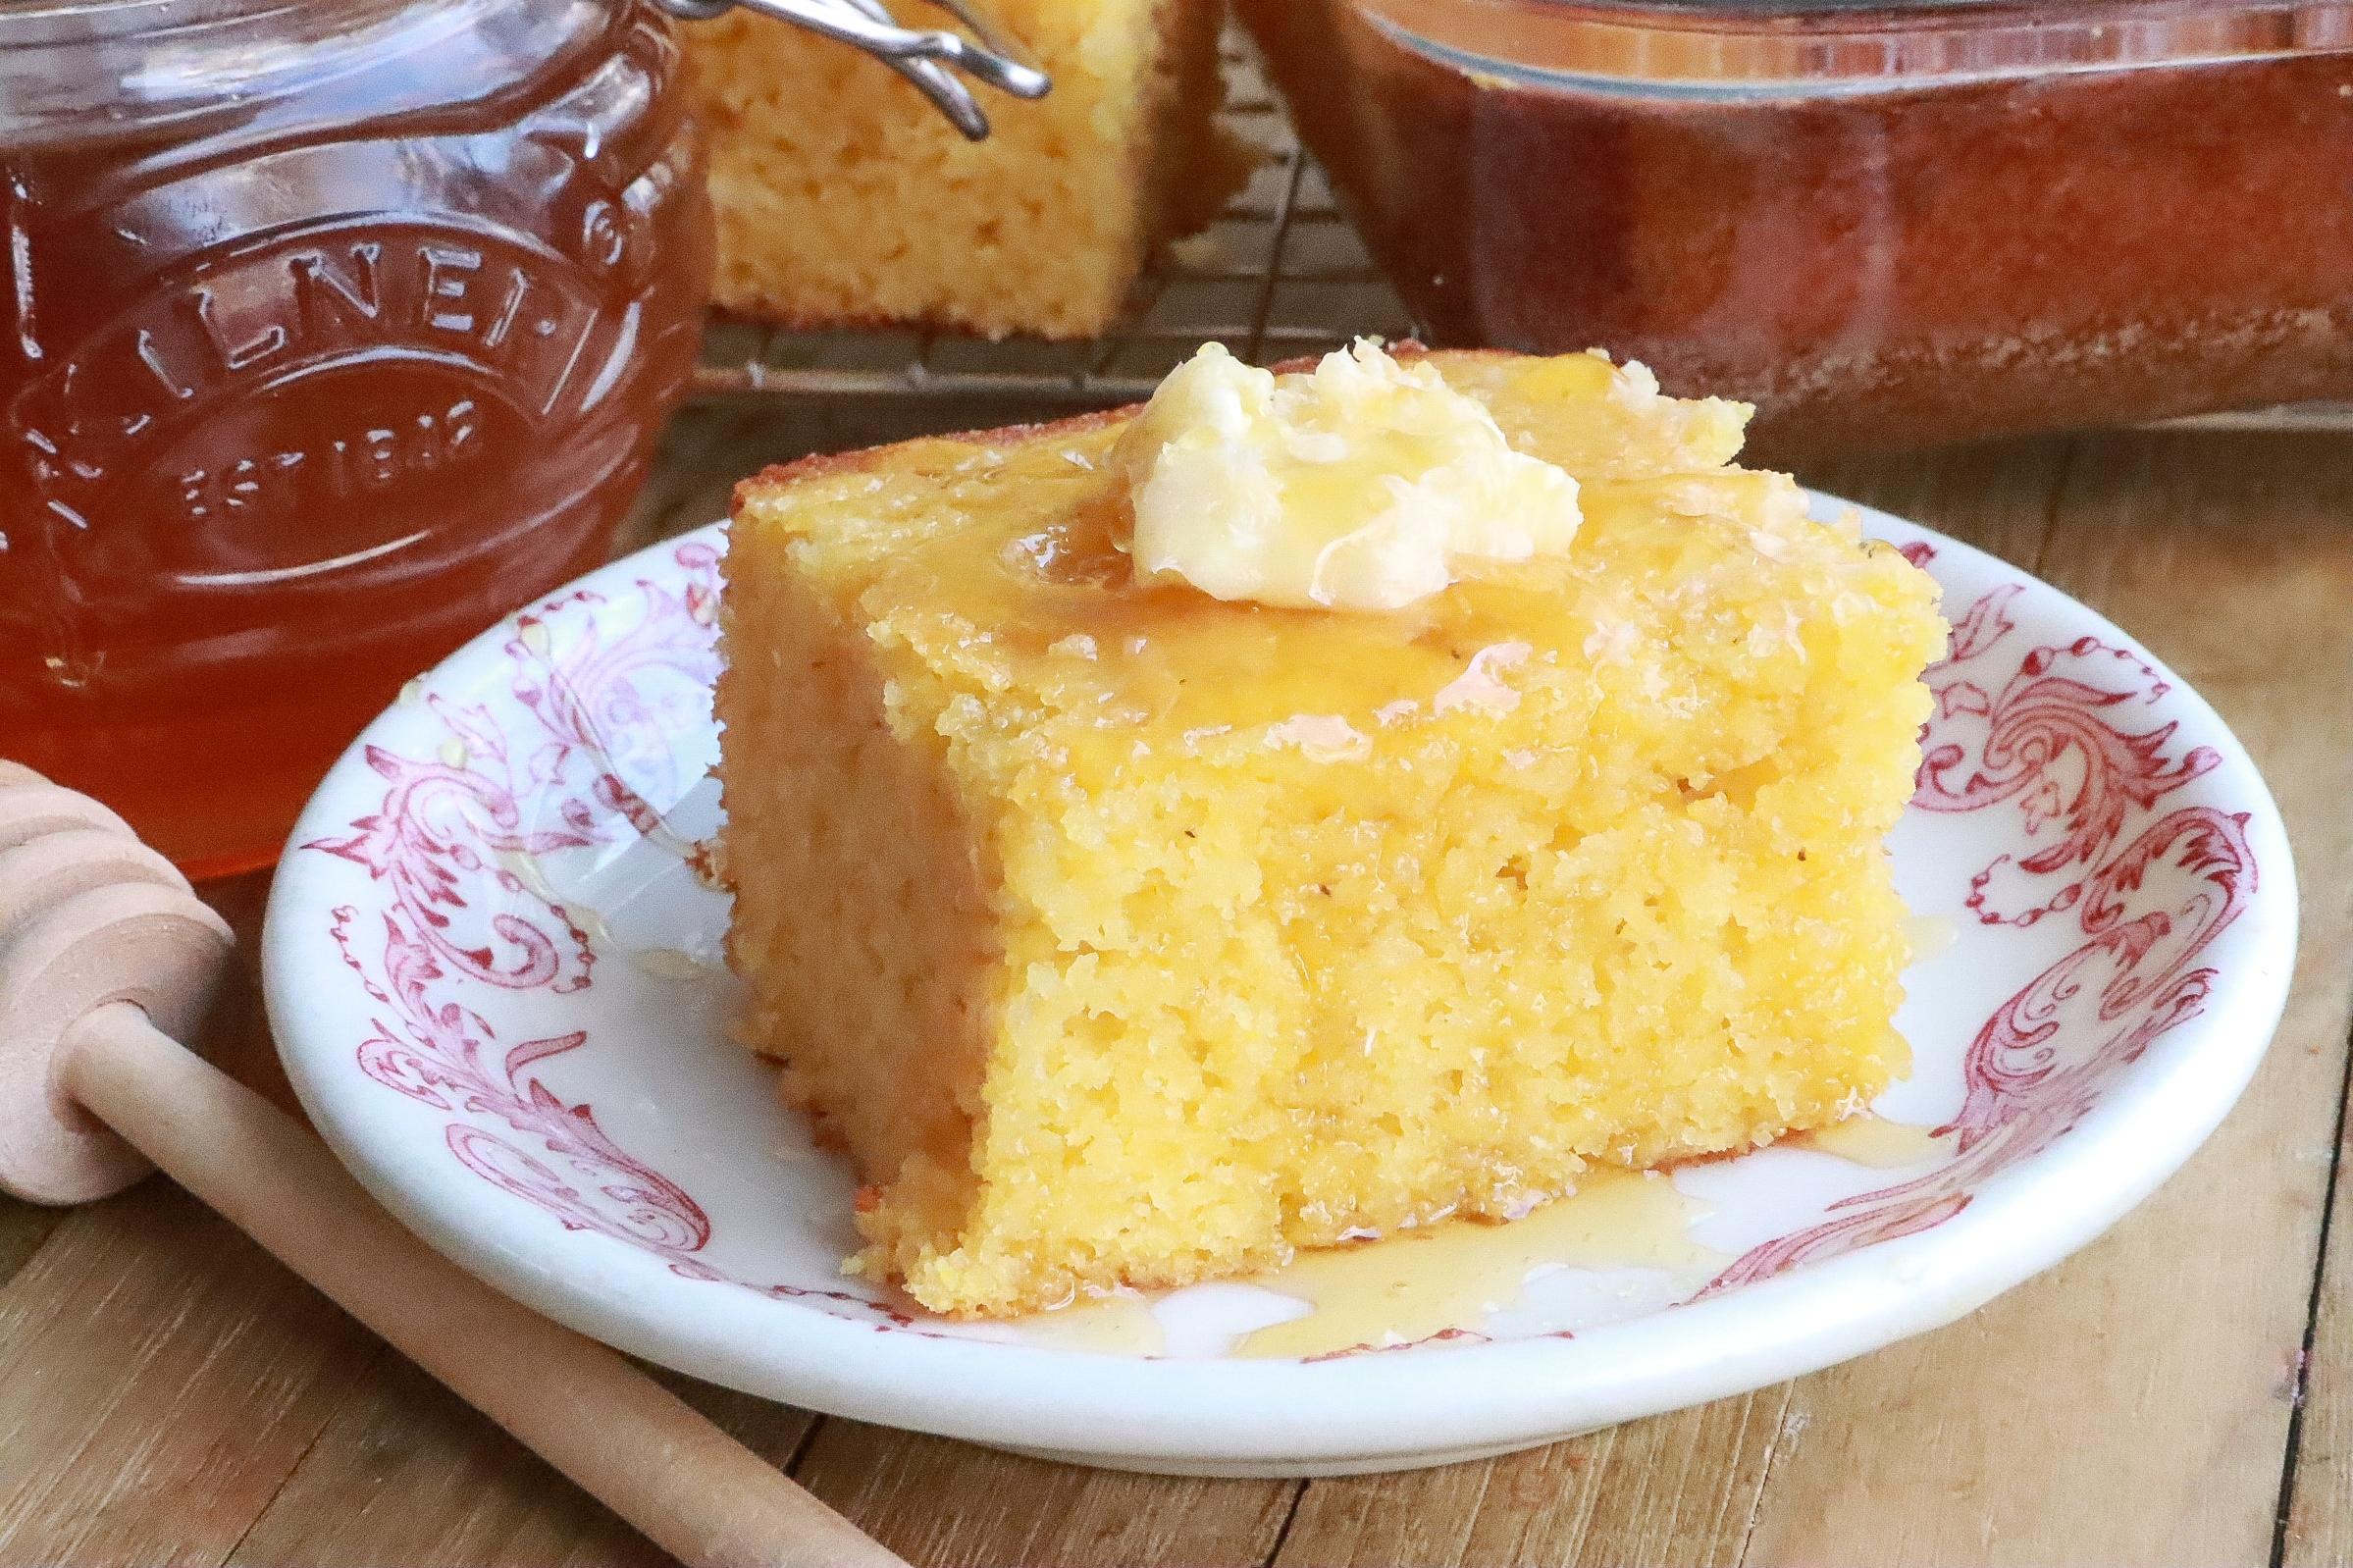  Get ready to take a trip south with every bite of this delicious cornbread.